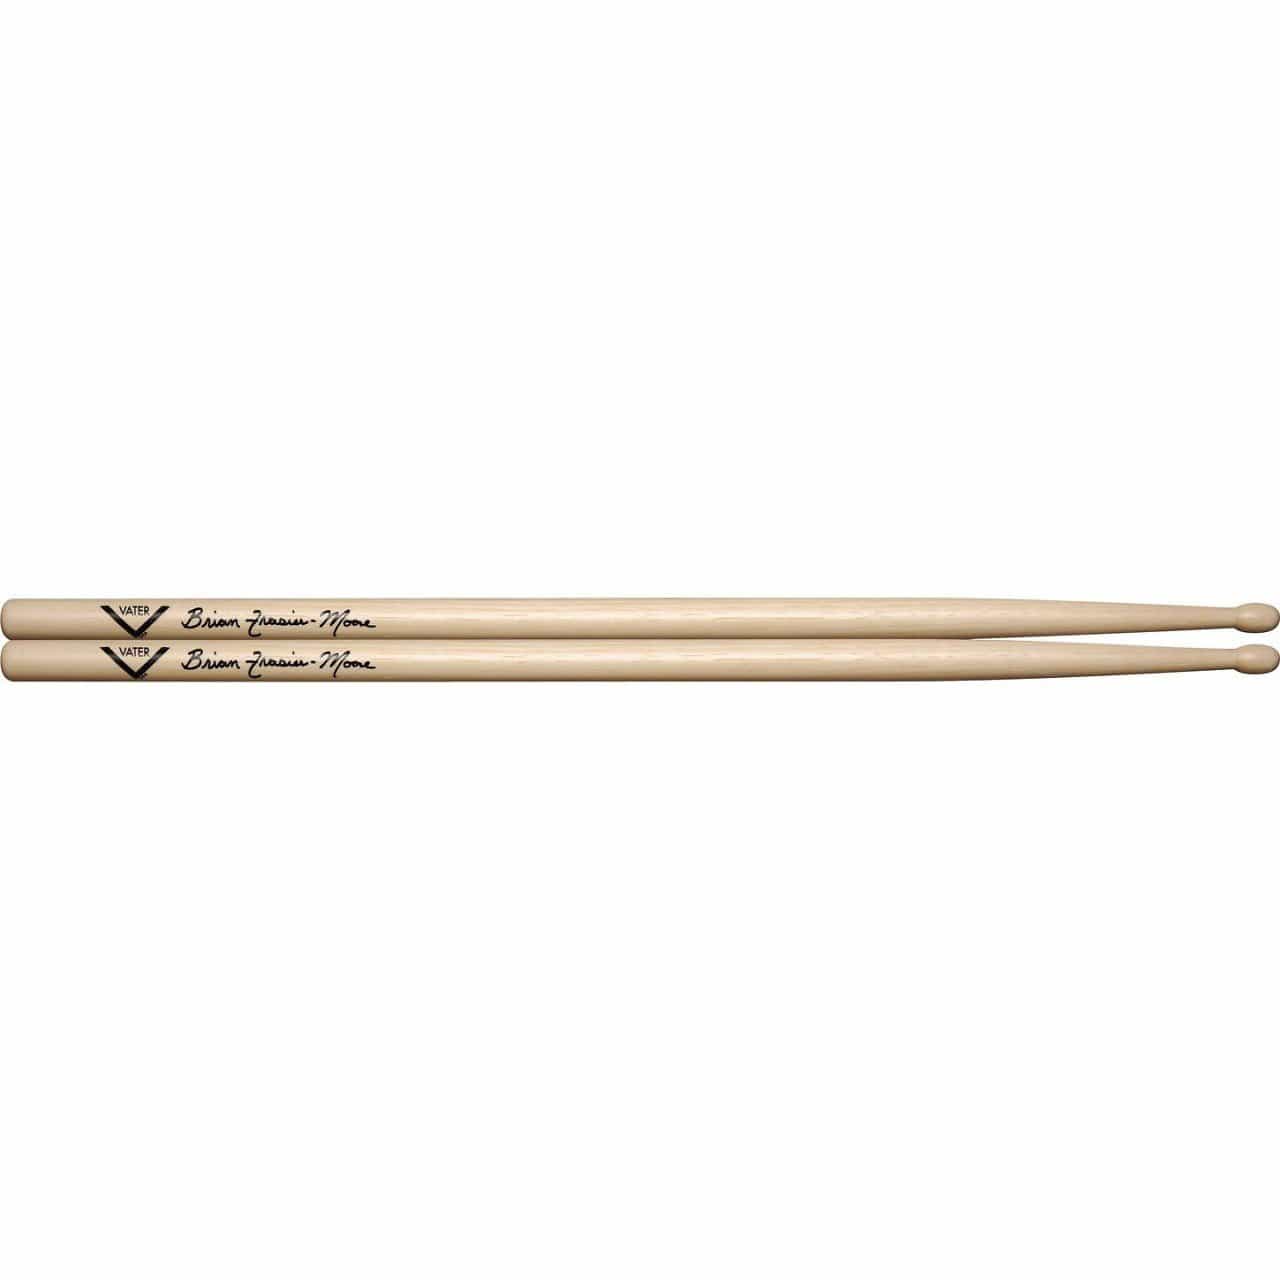 Vater Brian Frasier-Moore Signature Drum Sticks Drums and Percussion / Parts and Accessories / Drum Sticks and Mallets